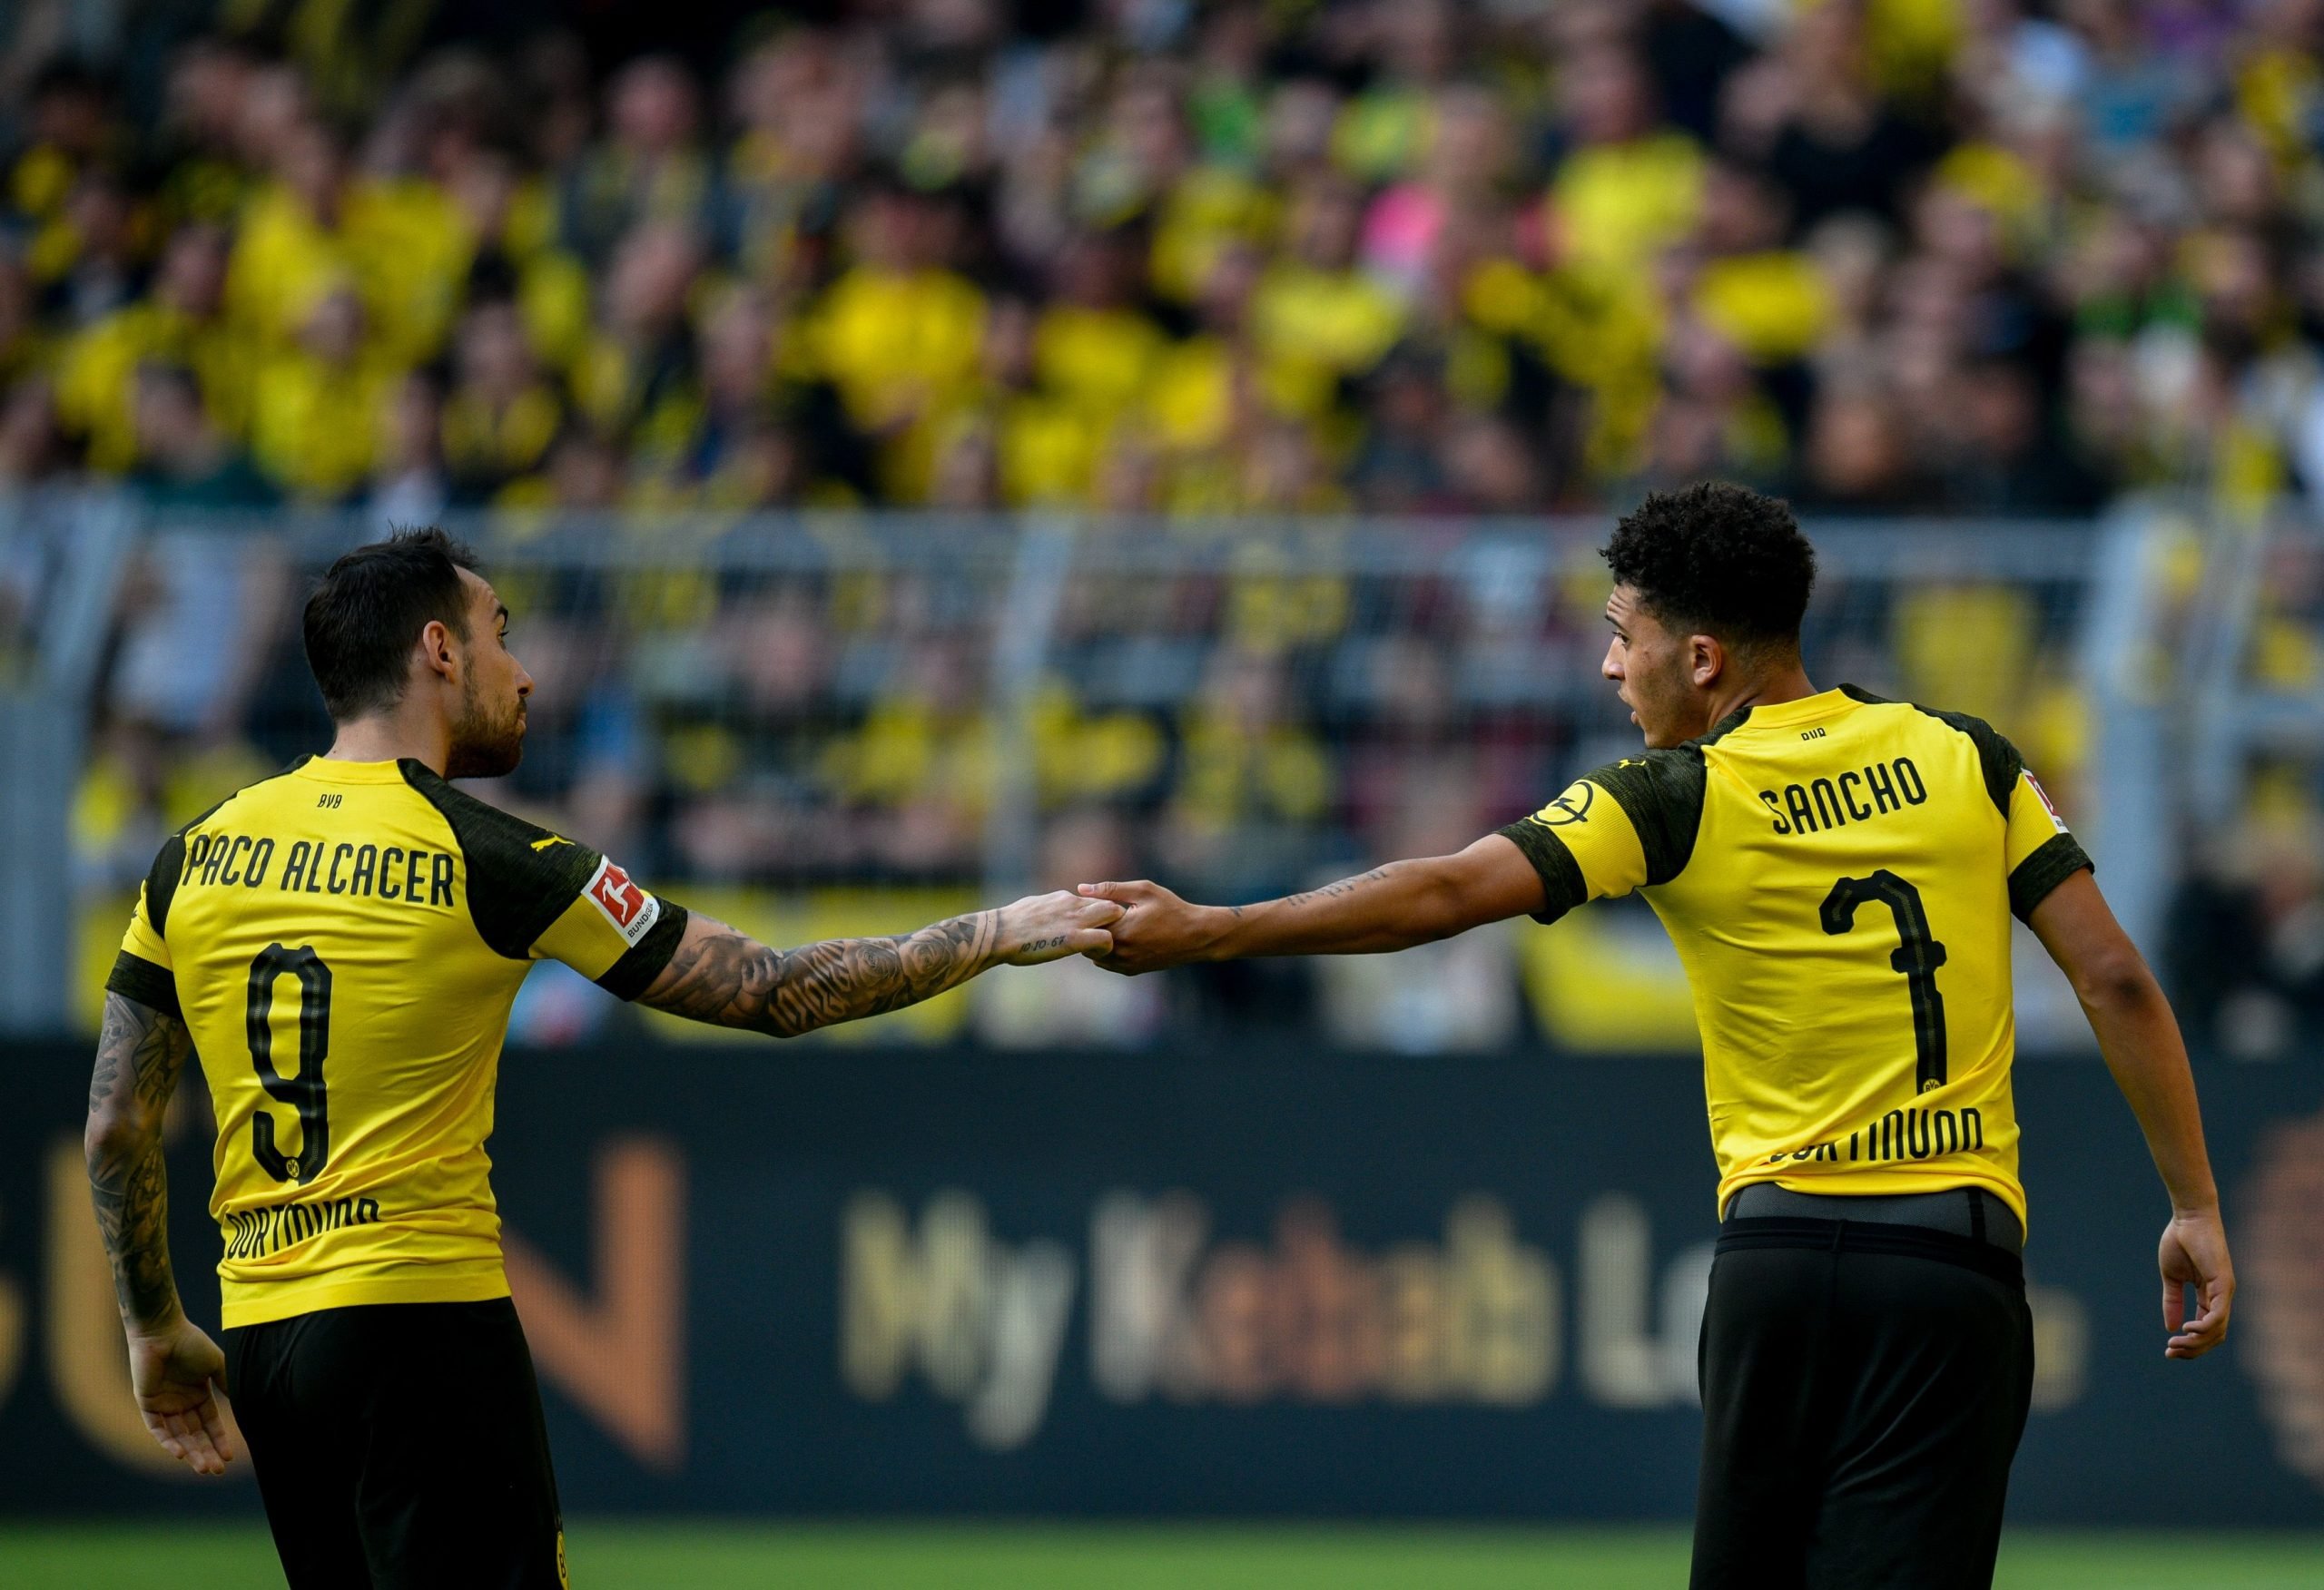 Dortmund's Spanish forward Paco Alcacer (L) and Dortmund's English midfielder Jadon Sancho react during the German first division Bundesliga football match Borussia Dortmund v VfL Wolfsburg on March 30, 2019 in Dortmund. (Photo by SASCHA SCHUERMANN / AFP) / RESTRICTIONS: DFL REGULATIONS PROHIBIT ANY USE OF PHOTOGRAPHS AS IMAGE SEQUENCES AND/OR QUASI-VIDEO        (Photo credit should read SASCHA SCHUERMANN/AFP/Getty Images)